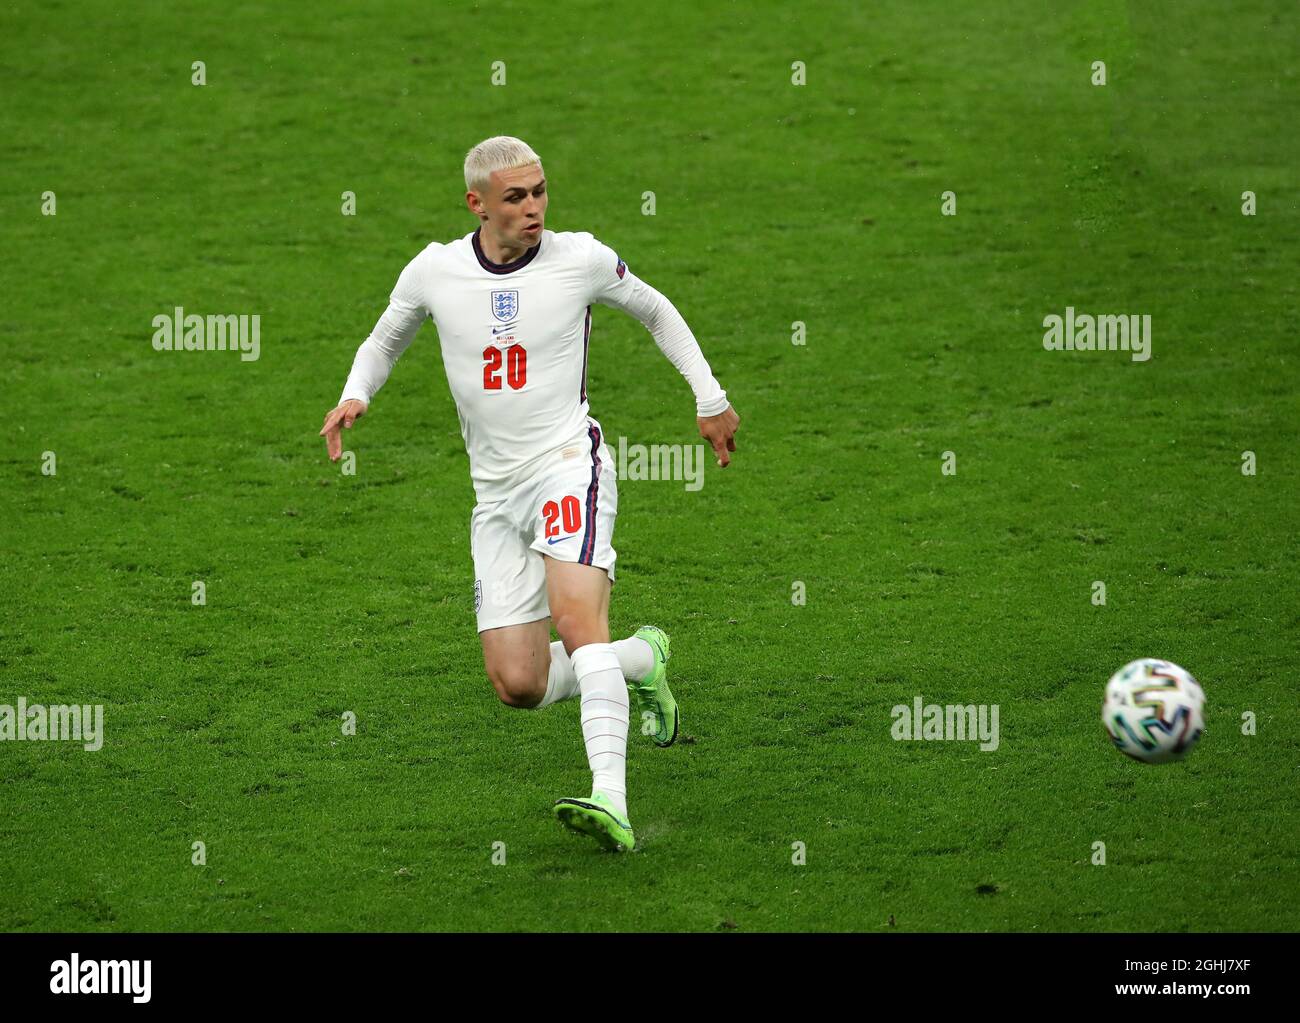 London, England, 18th June 2021. Phil Foden of England during the UEFA European Championships match at Wembley Stadium, London. Picture credit should read: David Klein / Sportimage via PA Images Stock Photo